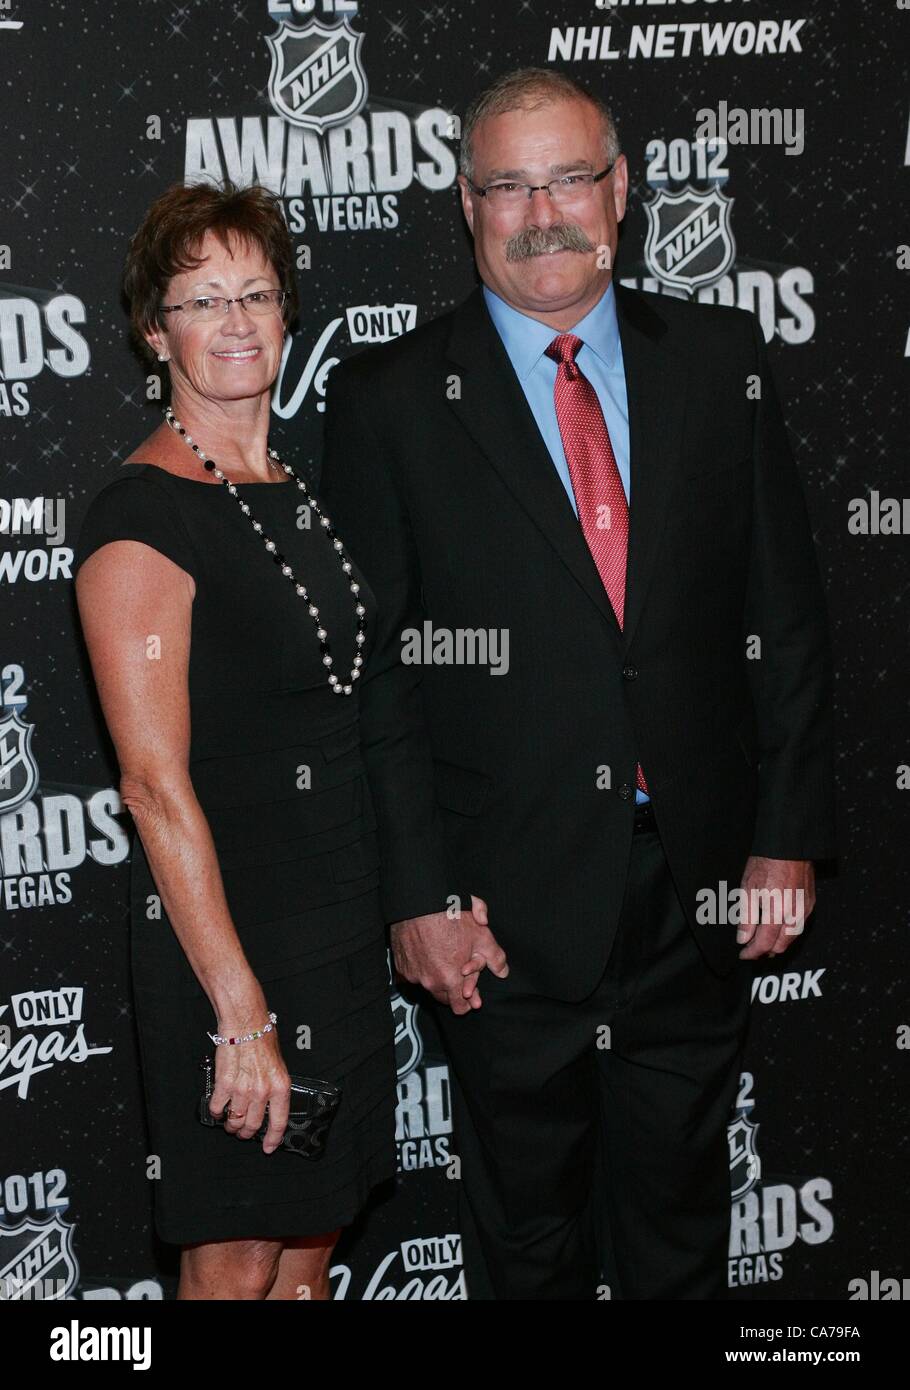 Sharon MacLean, Paul MacLean in attendance for 2012 National Hockey League NHL Awards, Encore Theater at the Wynn Las Vegas, Las Vegas, NV June 20, 2012. Photo By: James Atoa/Everett Collection Stock Photo